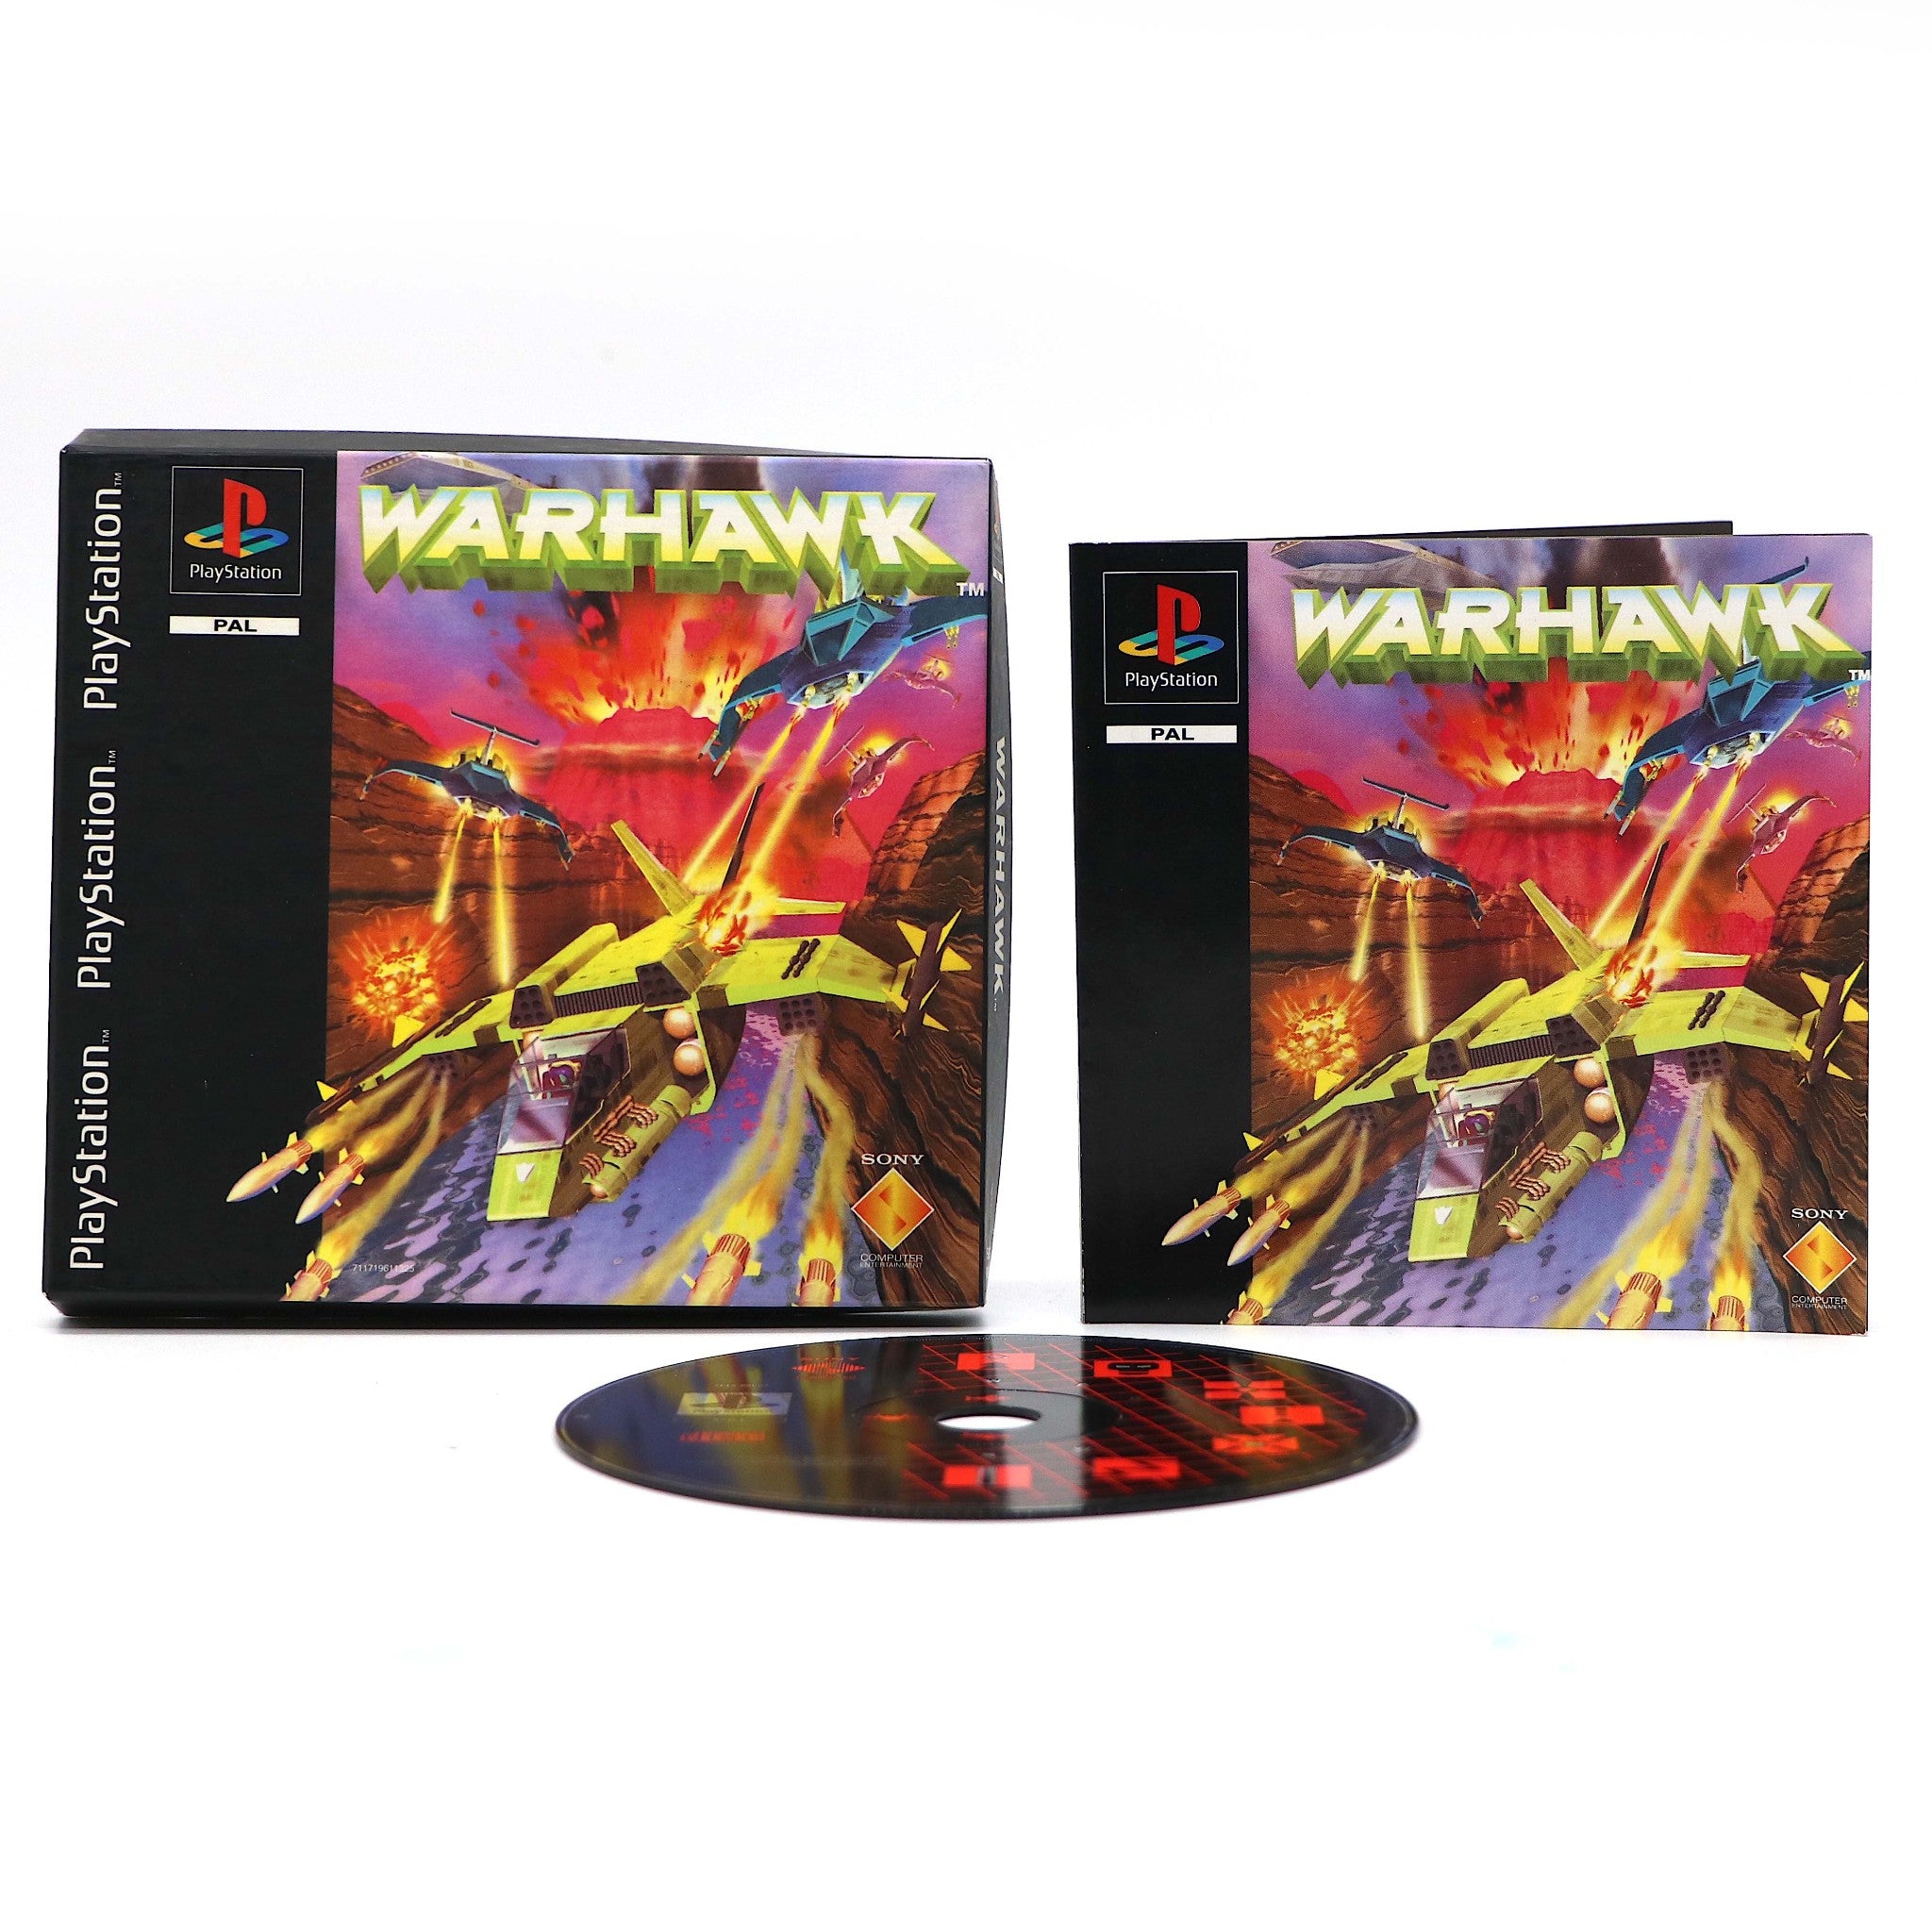 Warhawk | Sony PS1 PSOne Game | Cardboard Box | Collectable Condition